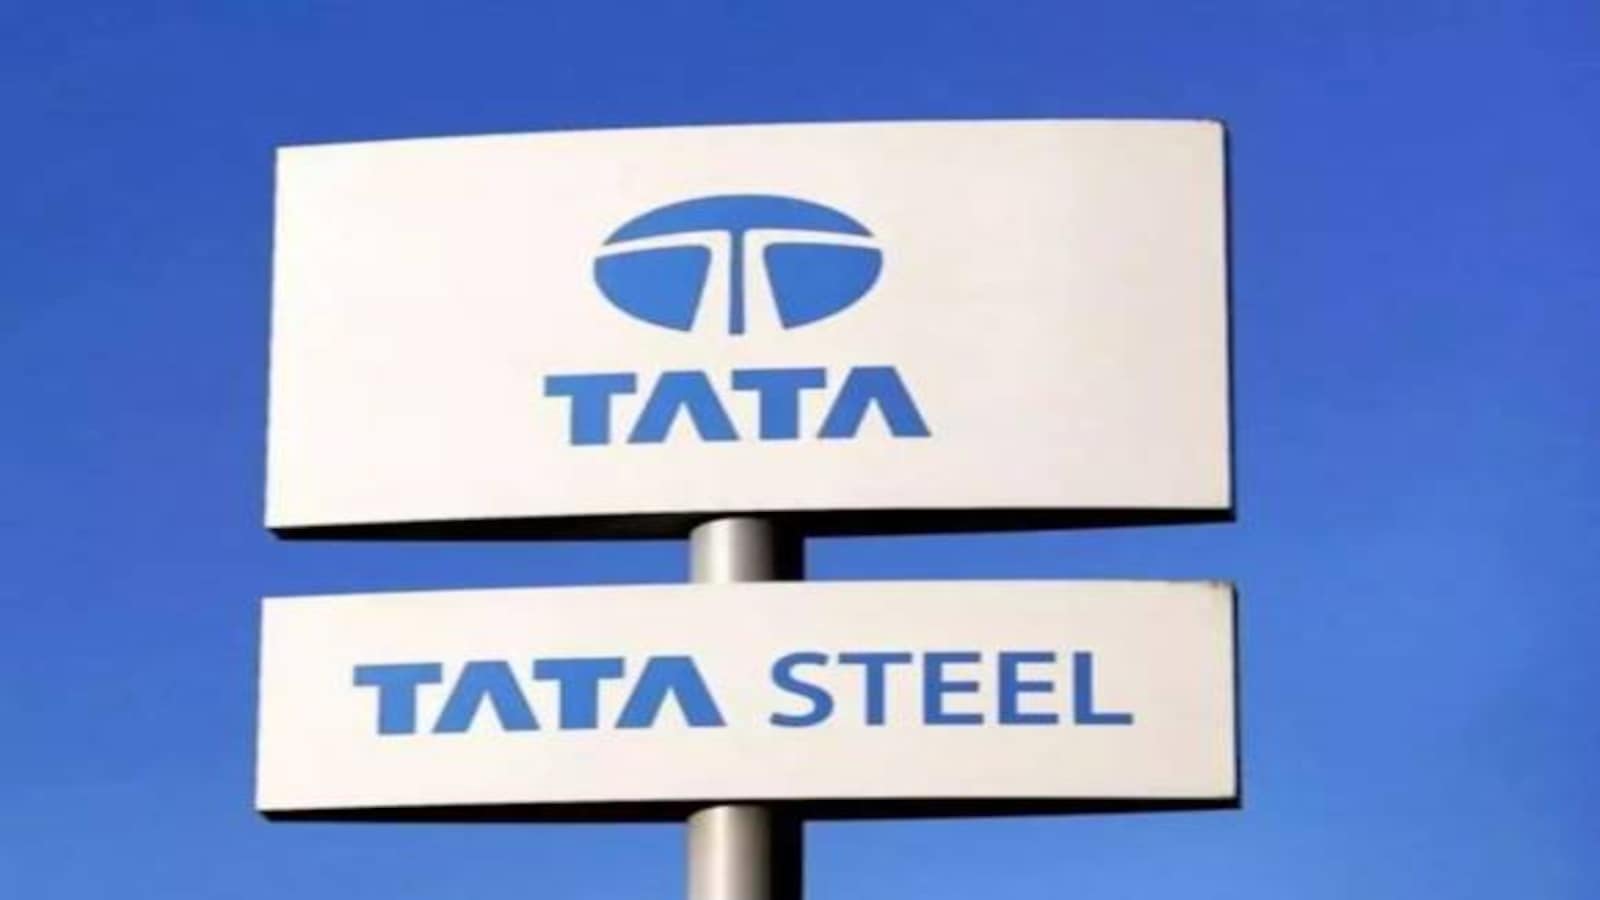 Let's close Tata Steel and build a new city and biobased industry on the  site' - Agro & Chemistry